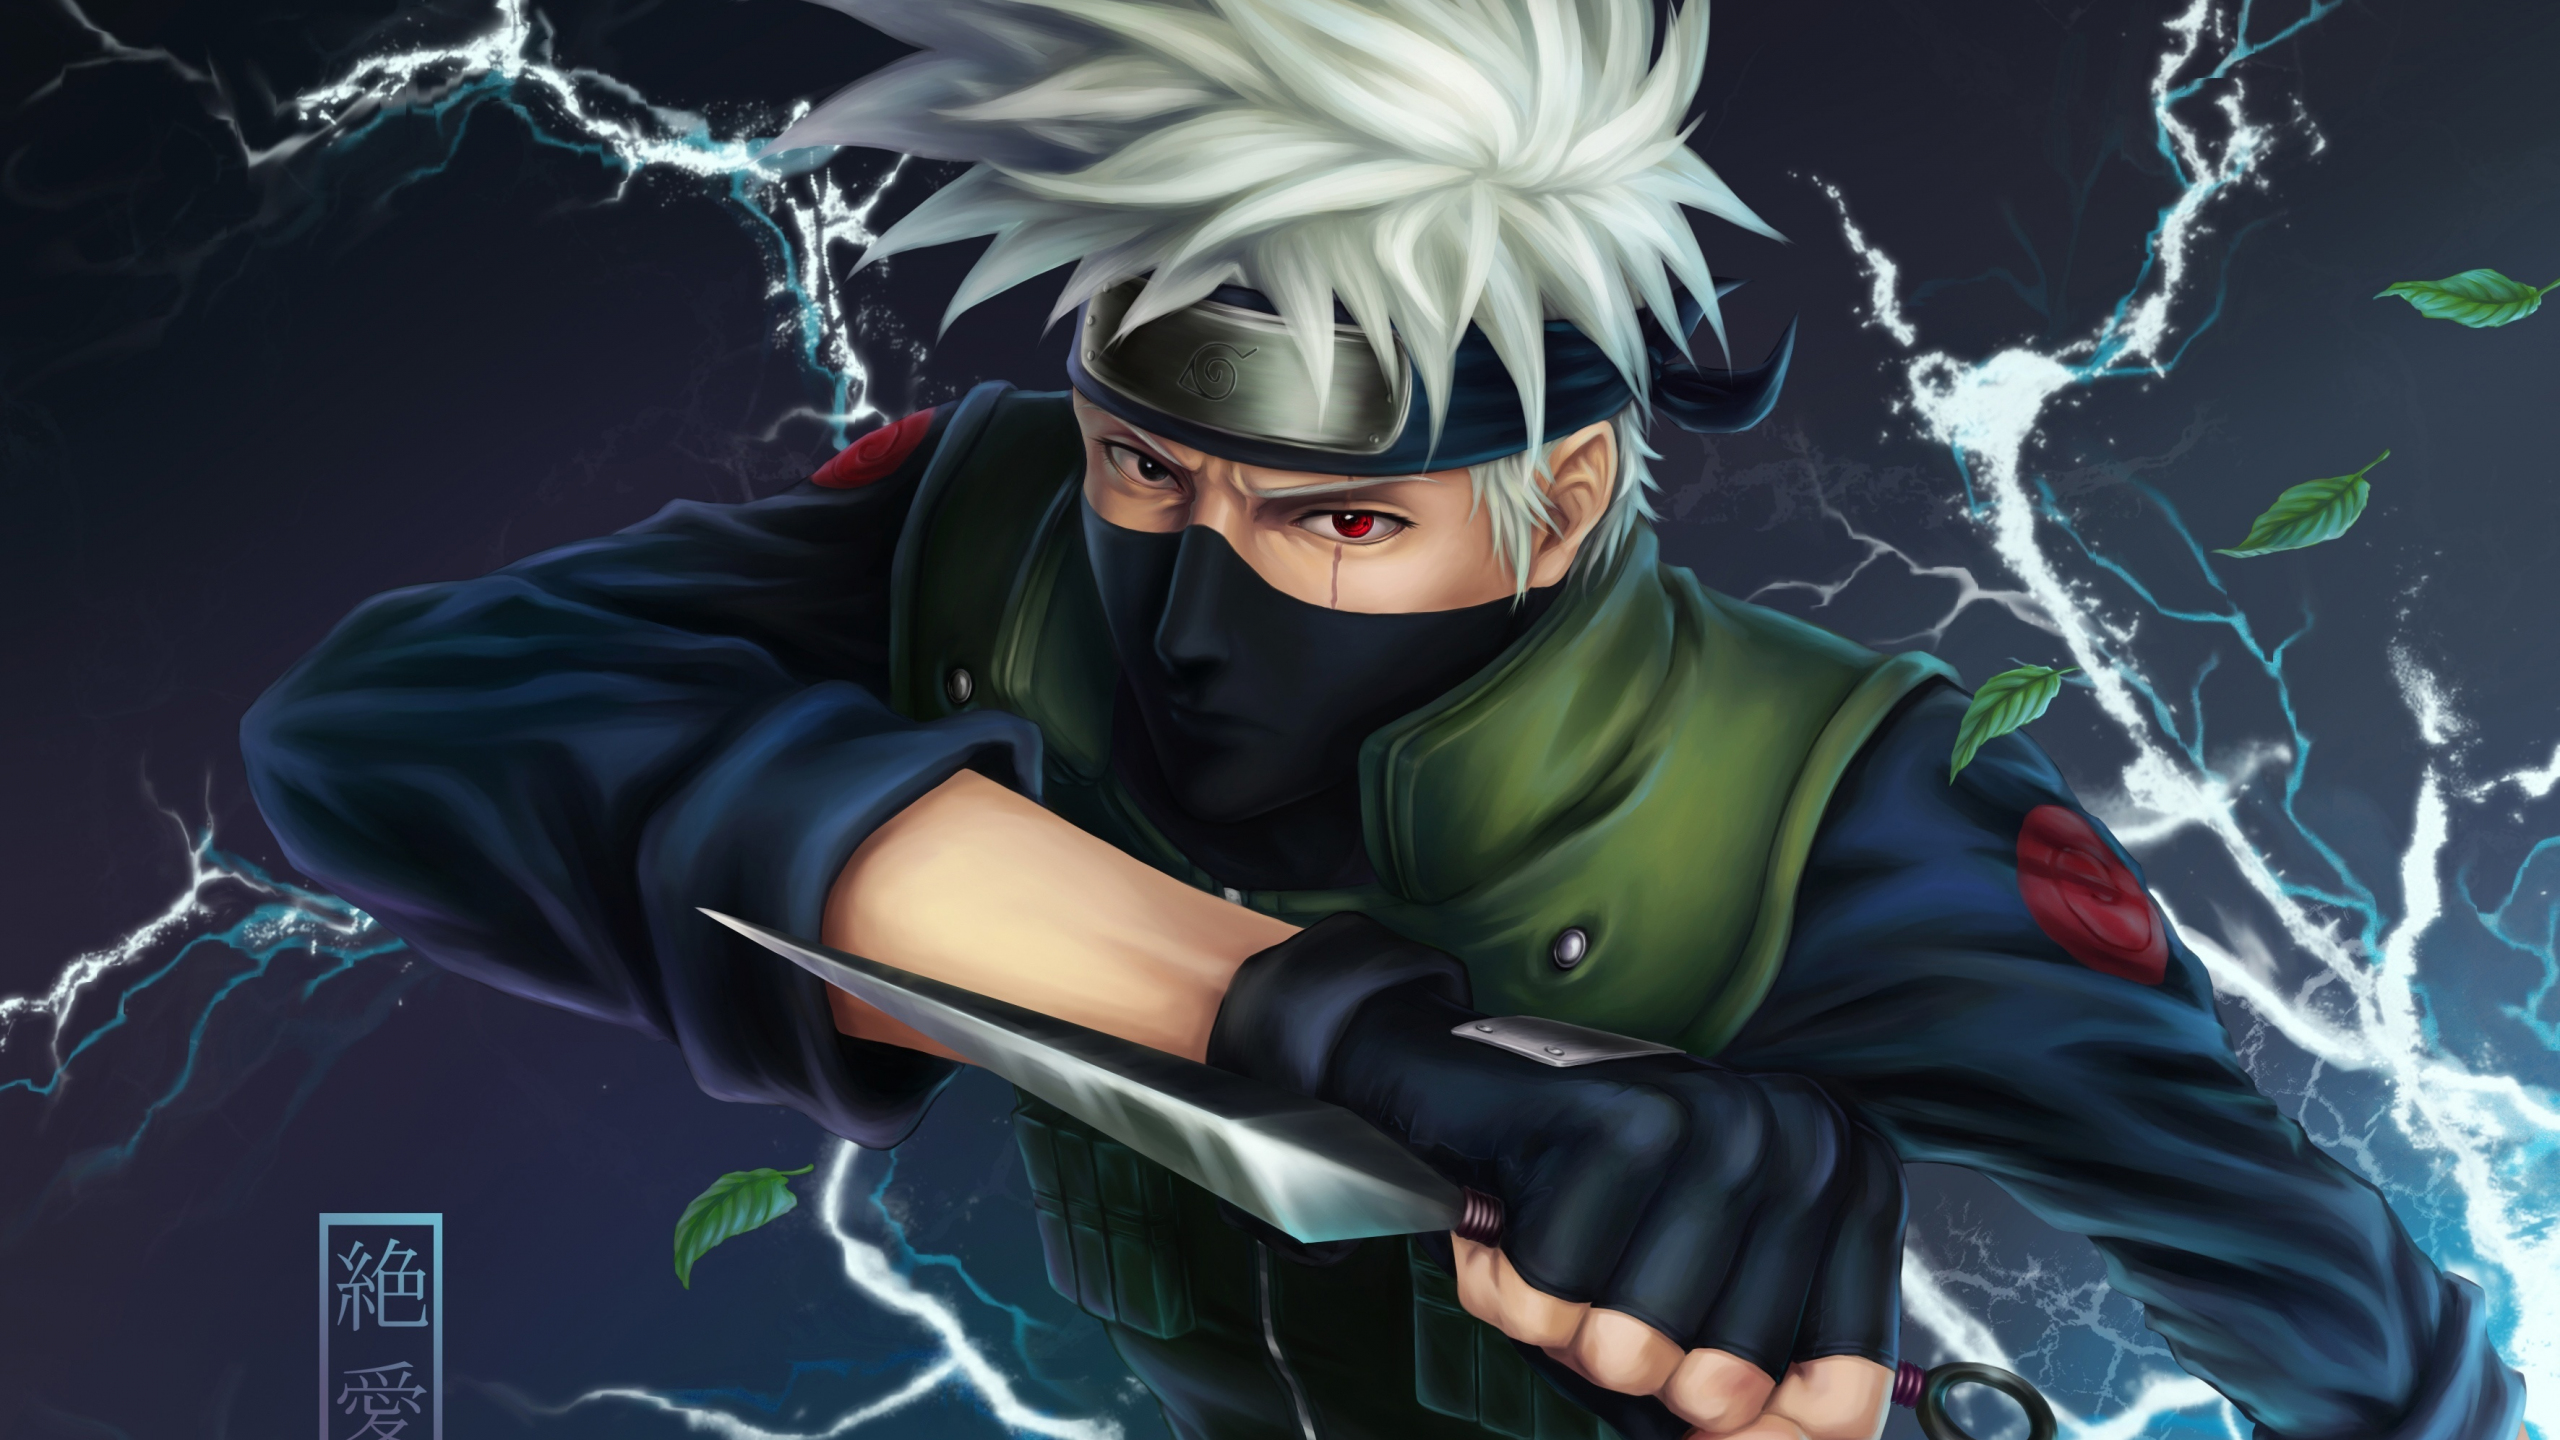 10 Most Popular Cool Naruto Shippuden Wallpapers Full Hd 1080p For Pc DE6